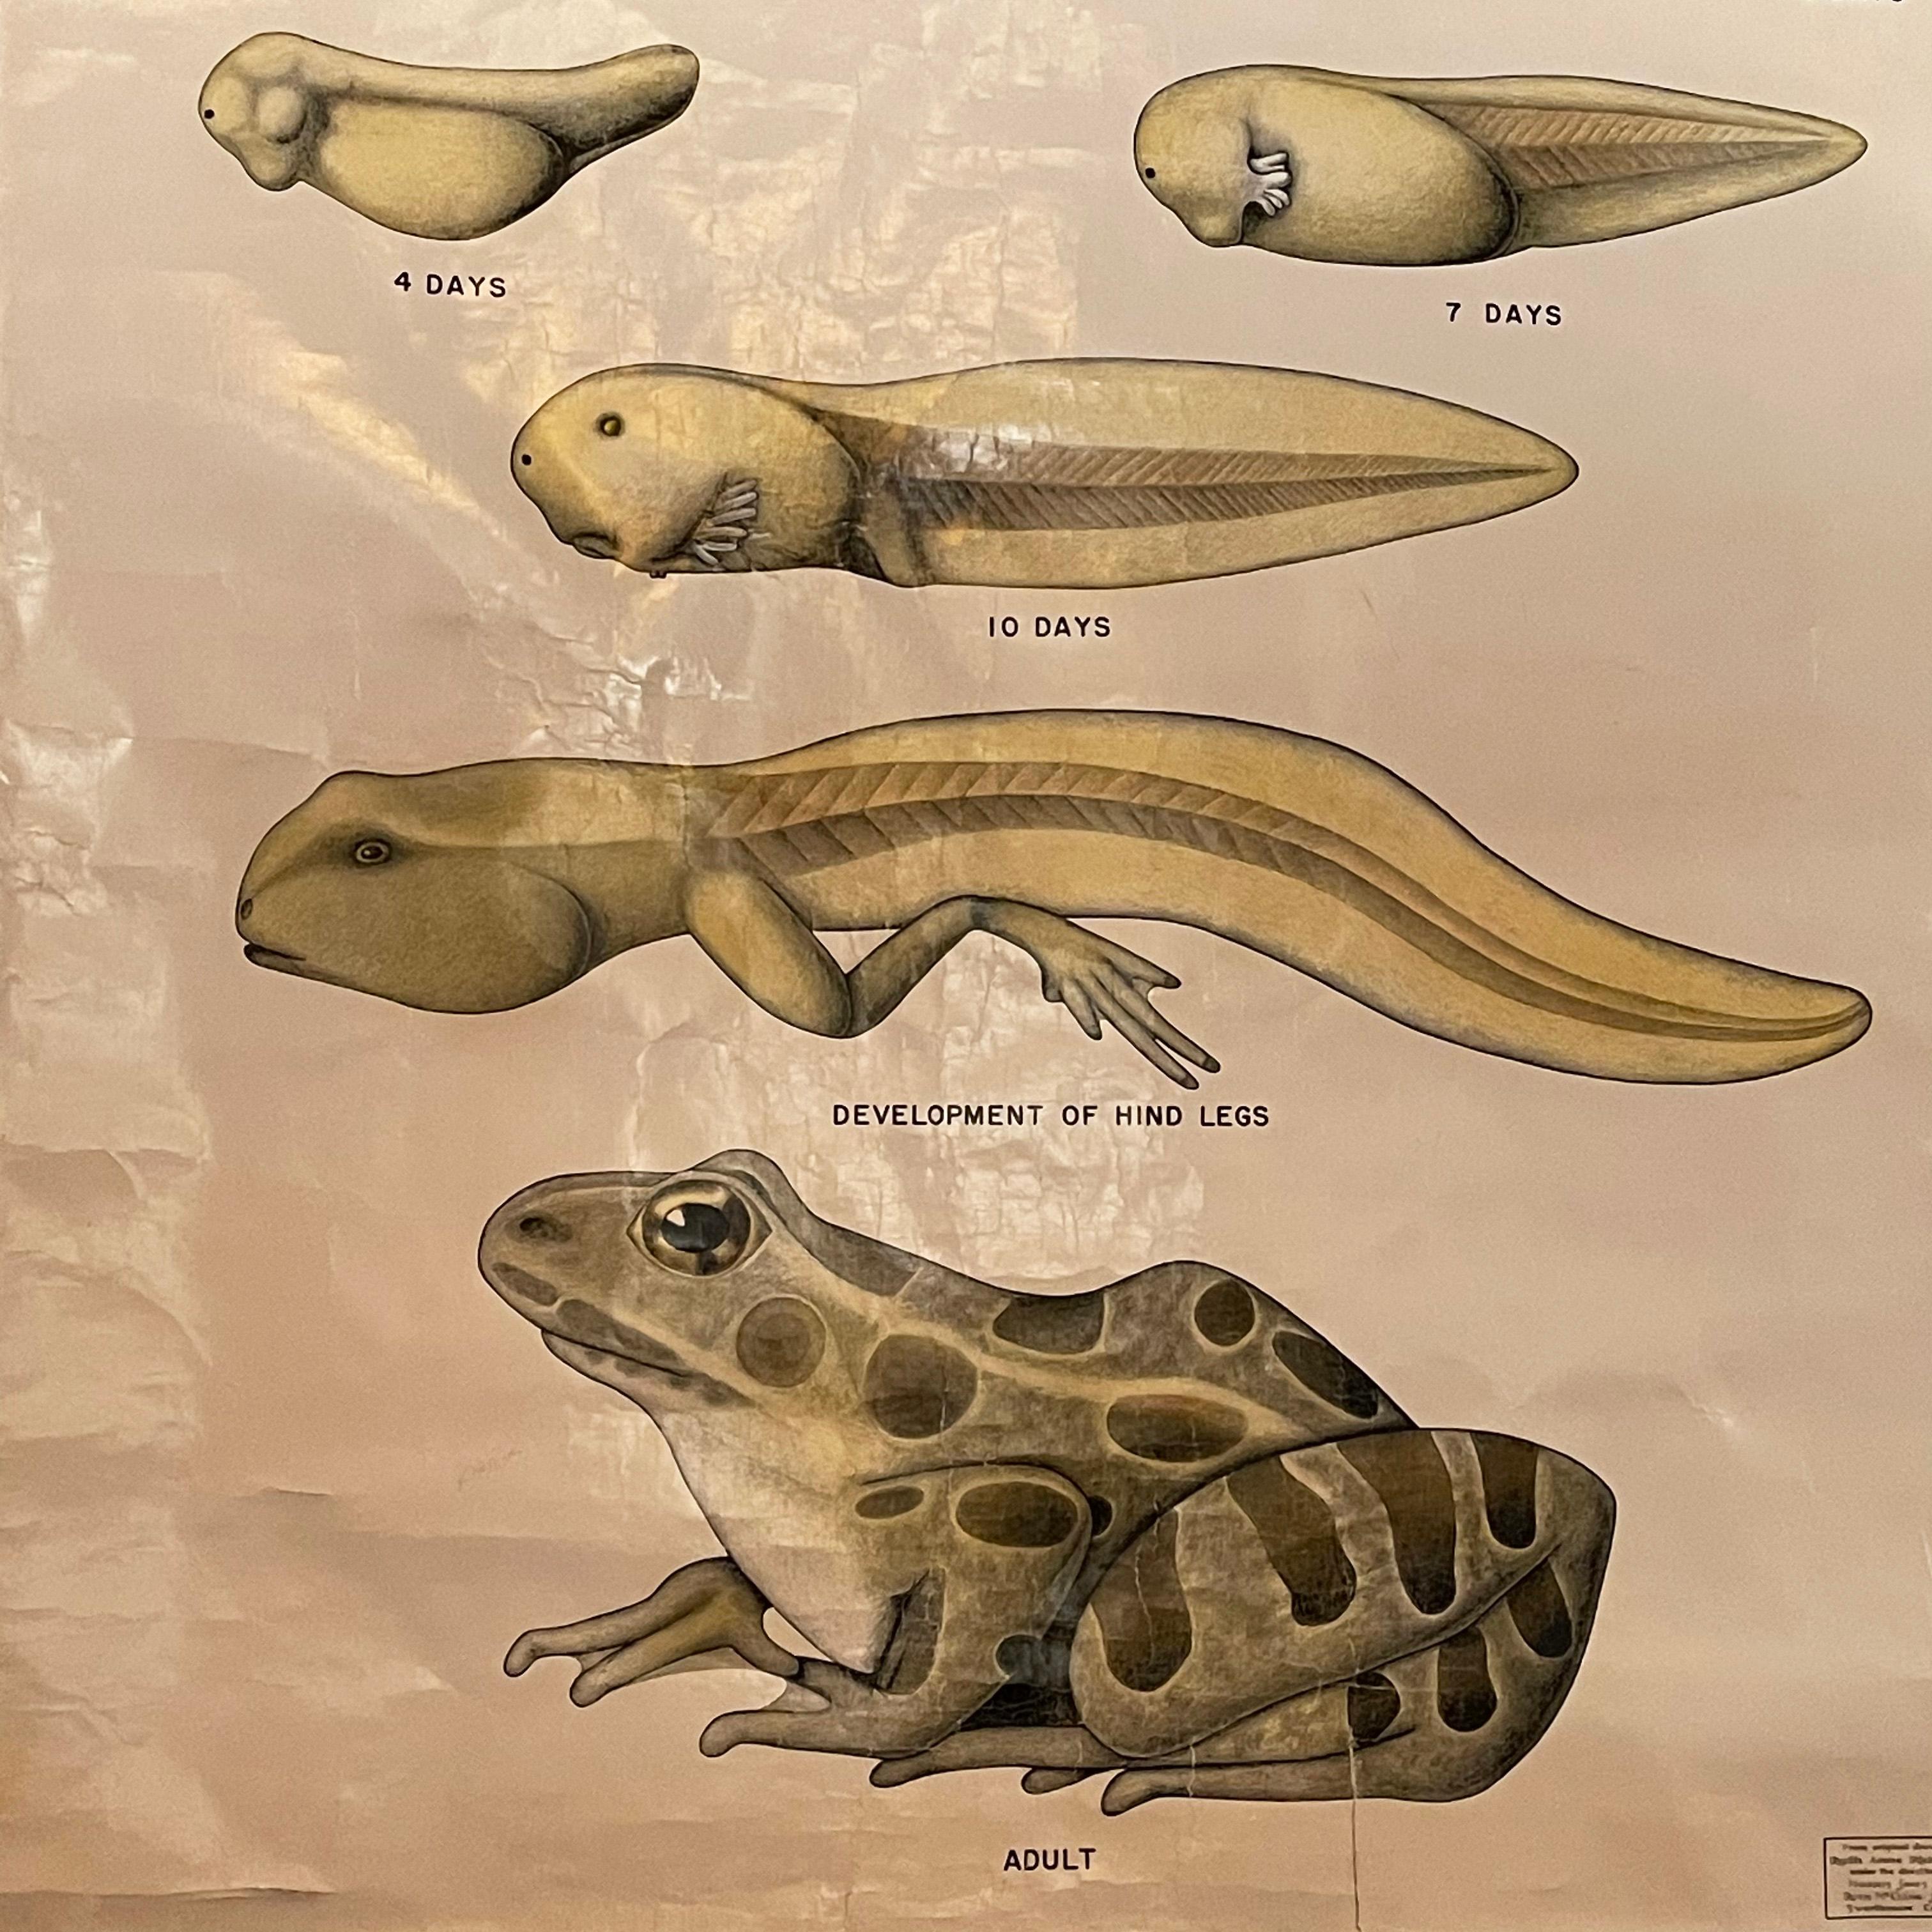 American Educational Frog Embryology Chart by The Welch Scientific Company